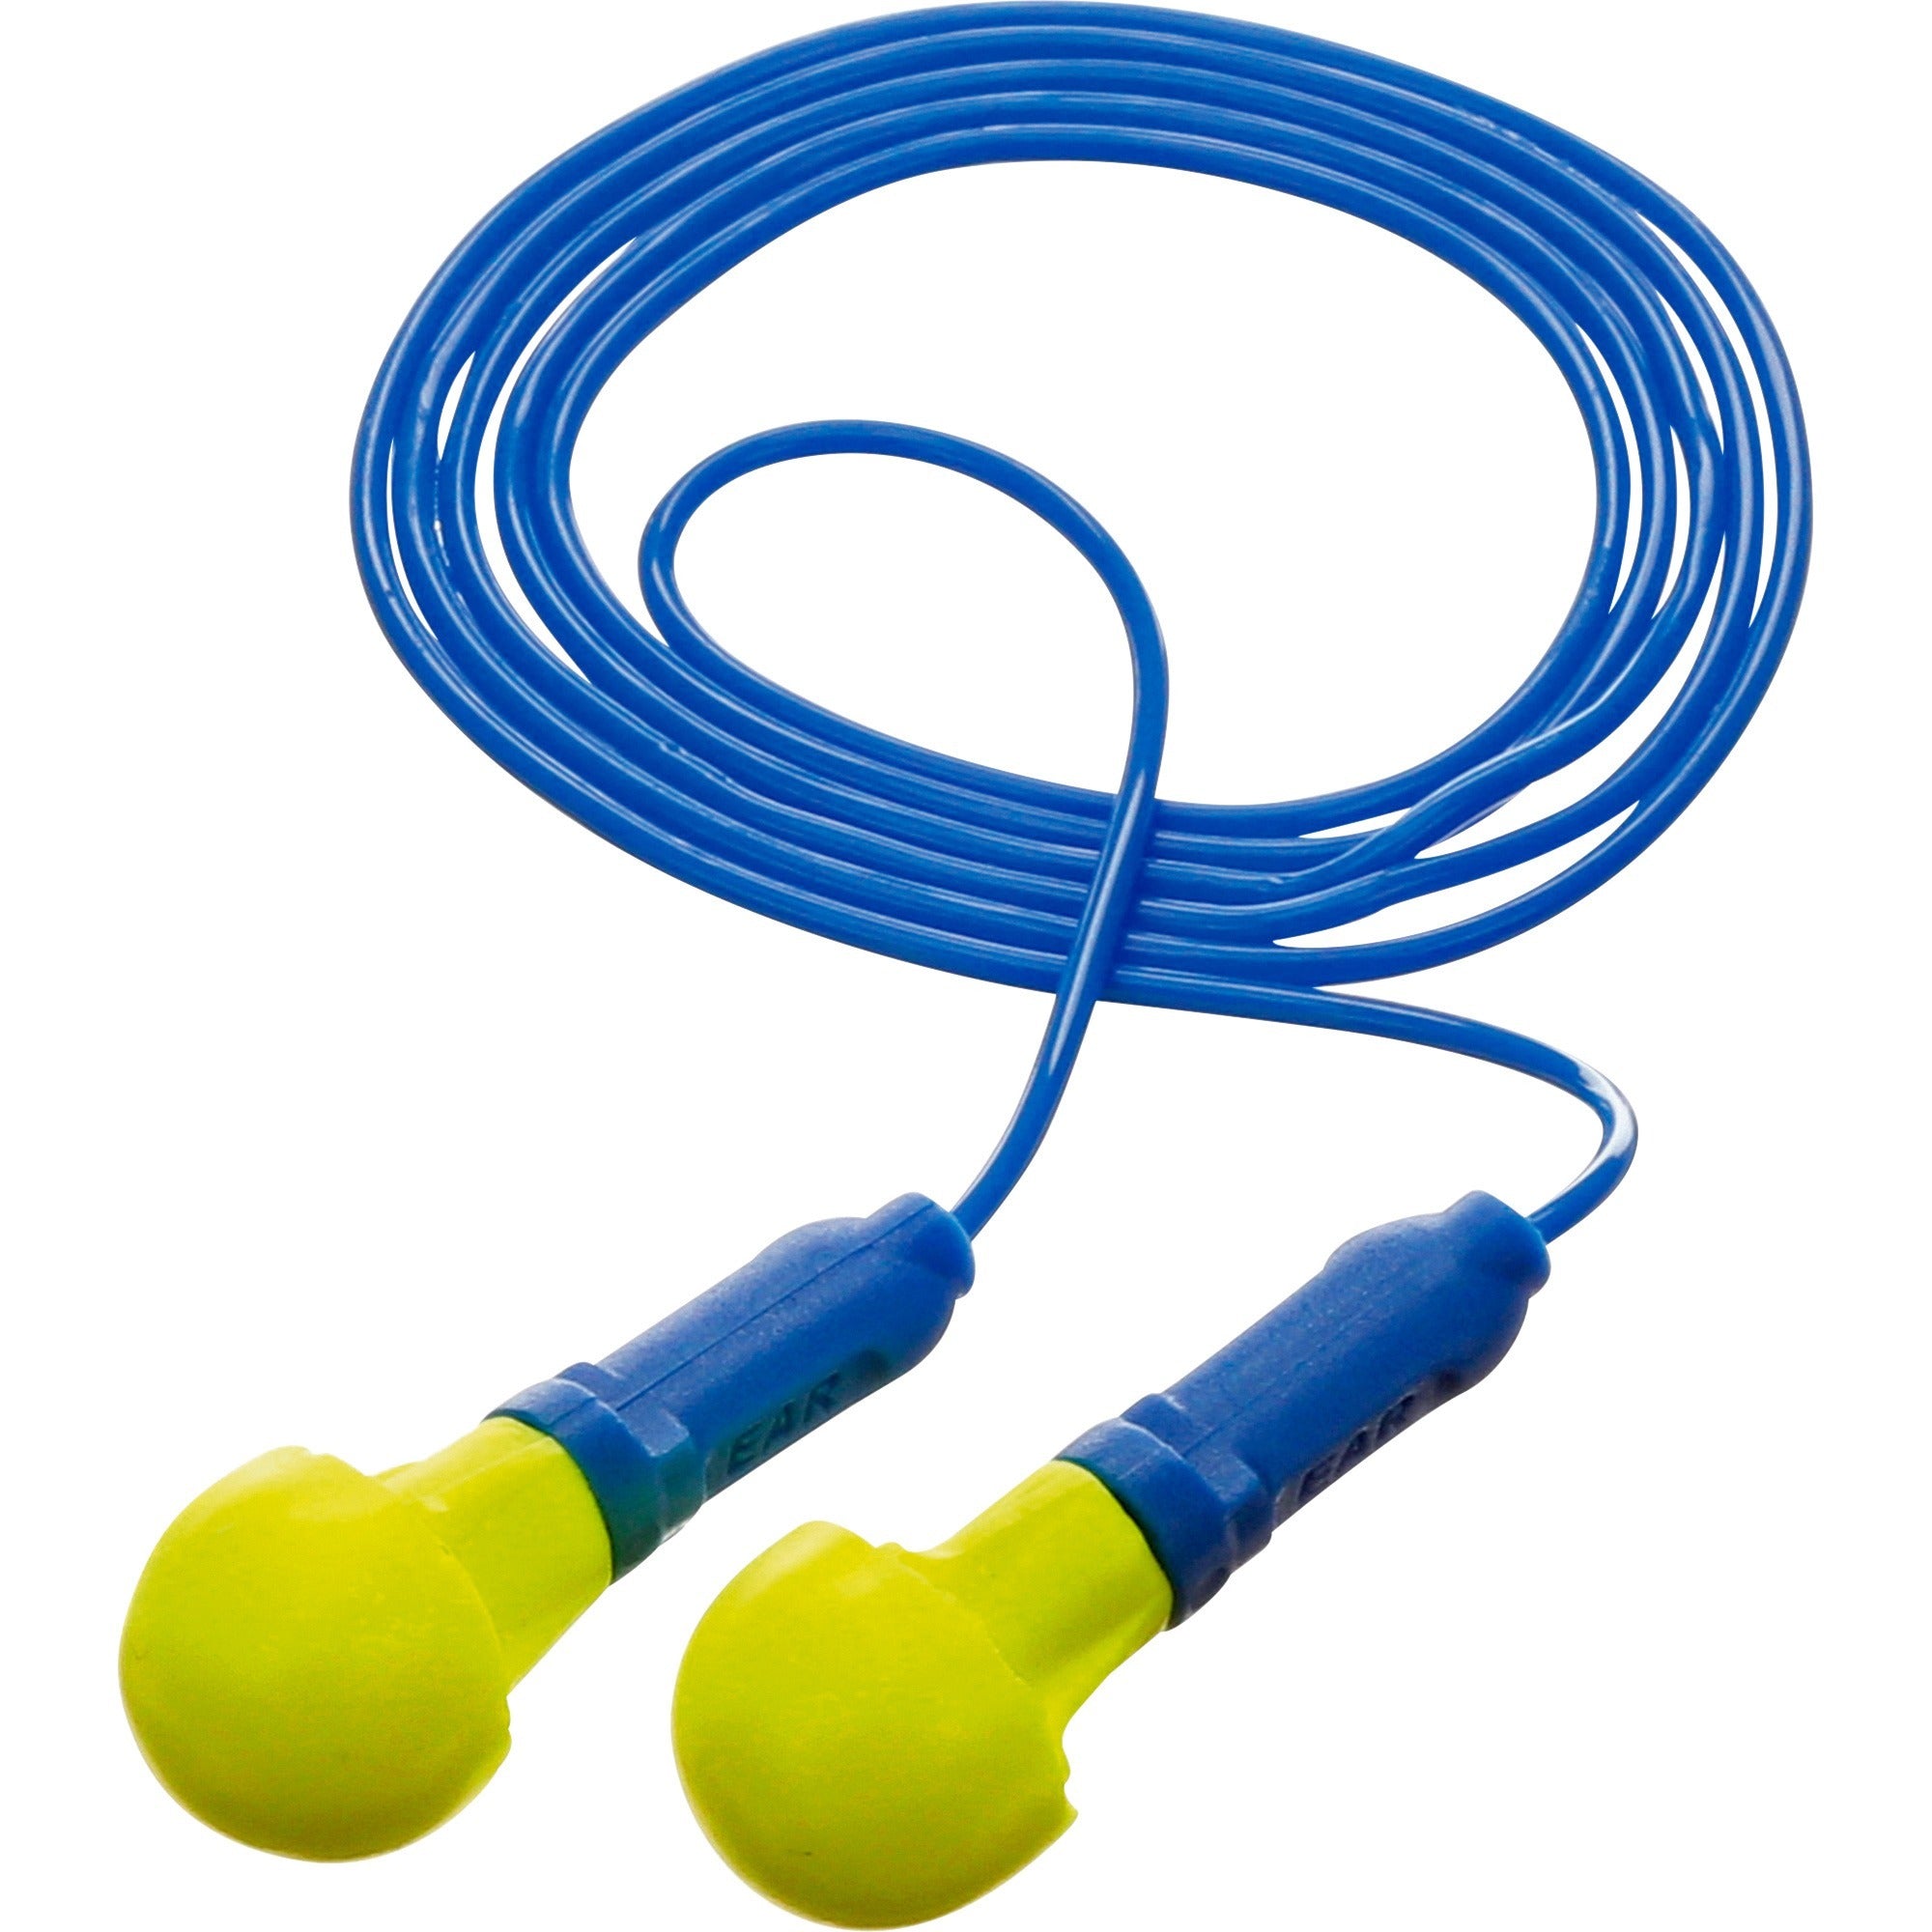 e-a-r-push-ins-corded-earplugs-noise-protection-foam-polyurethane-yellow-corded-comfortable-disposable-200-box_mmm3181003 - 1